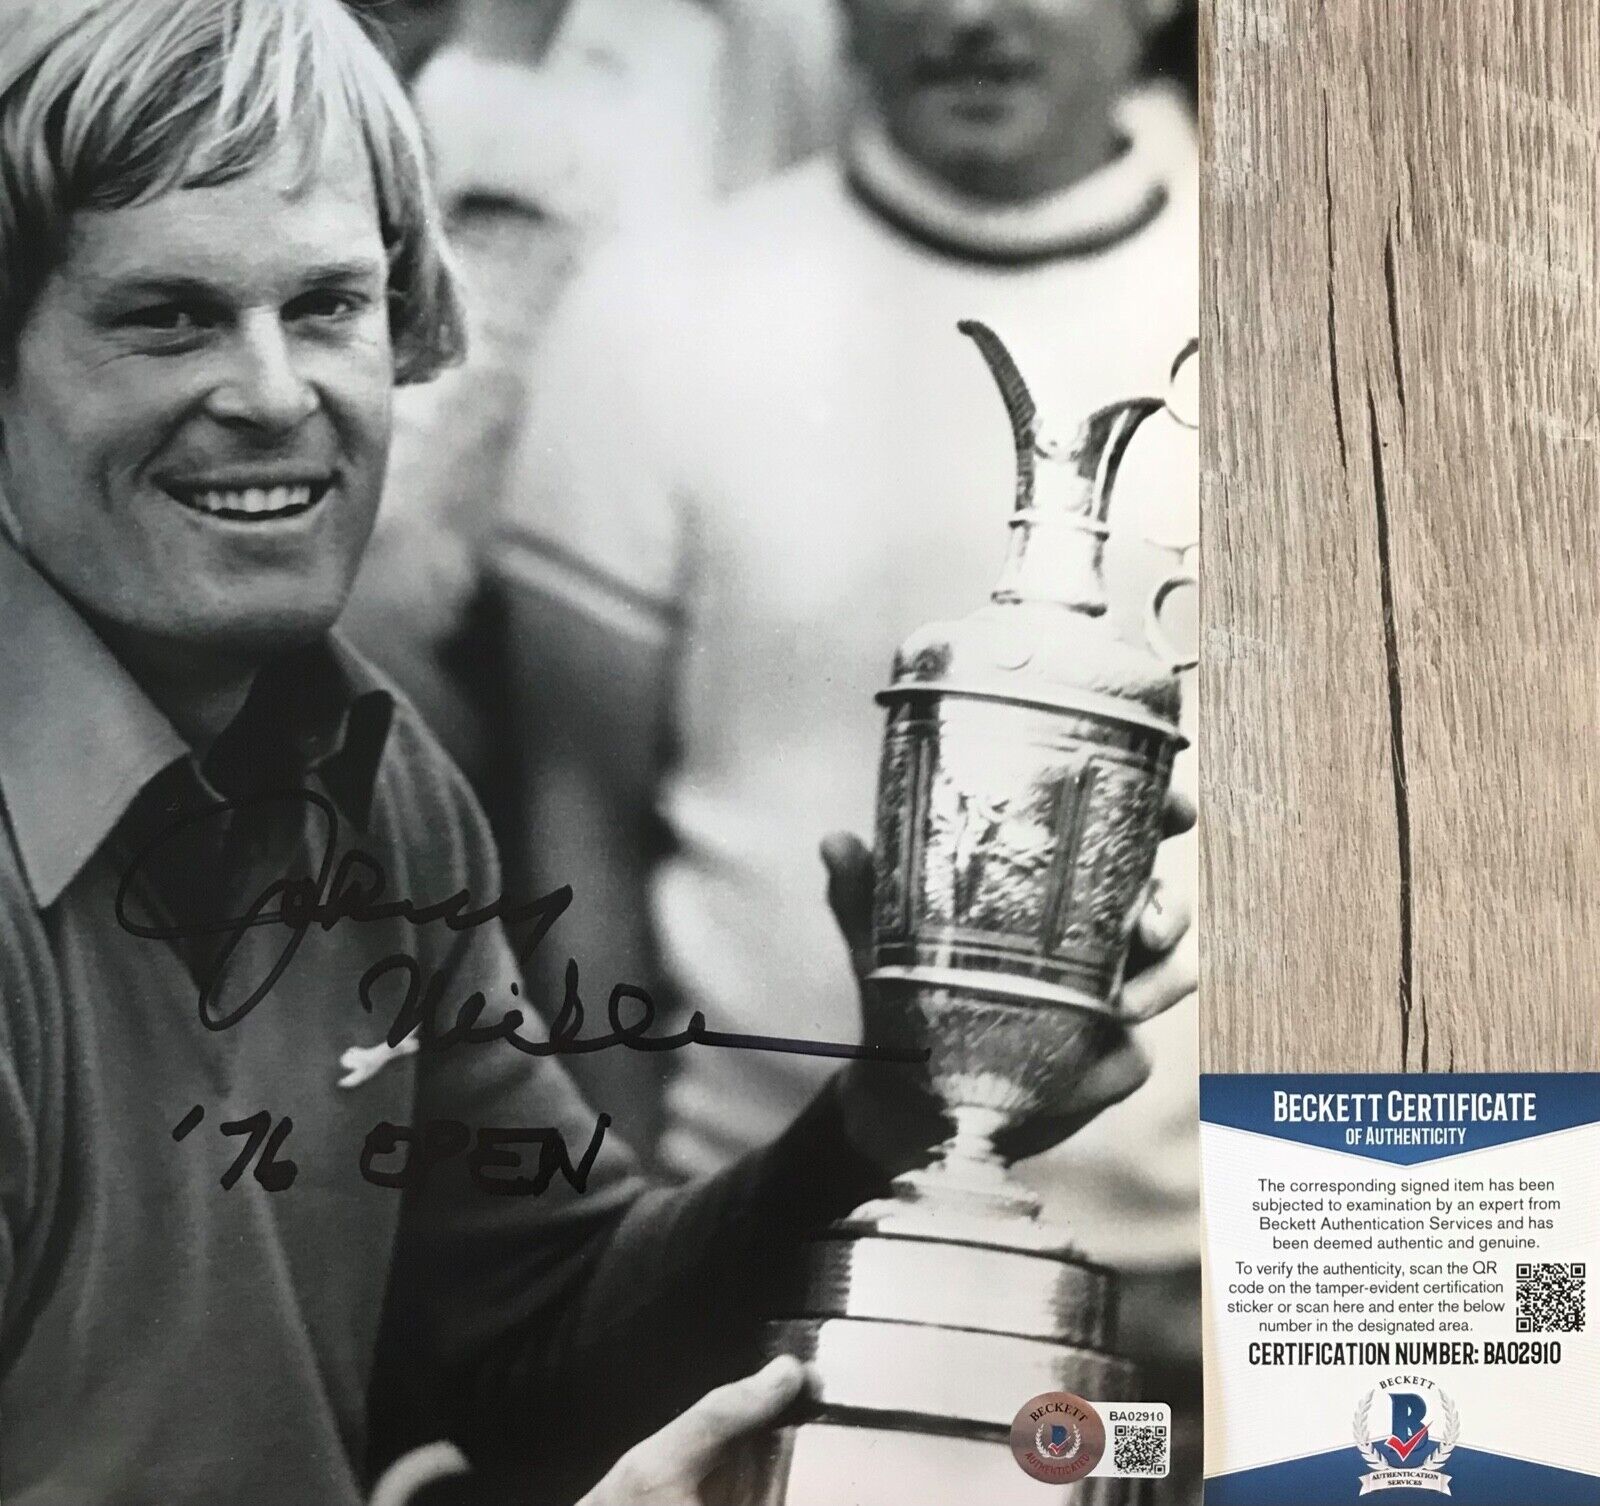 Johnny Miller US OPEN Autographed Signed PGA Golf 8x10 Photo Poster painting Beckett BAS